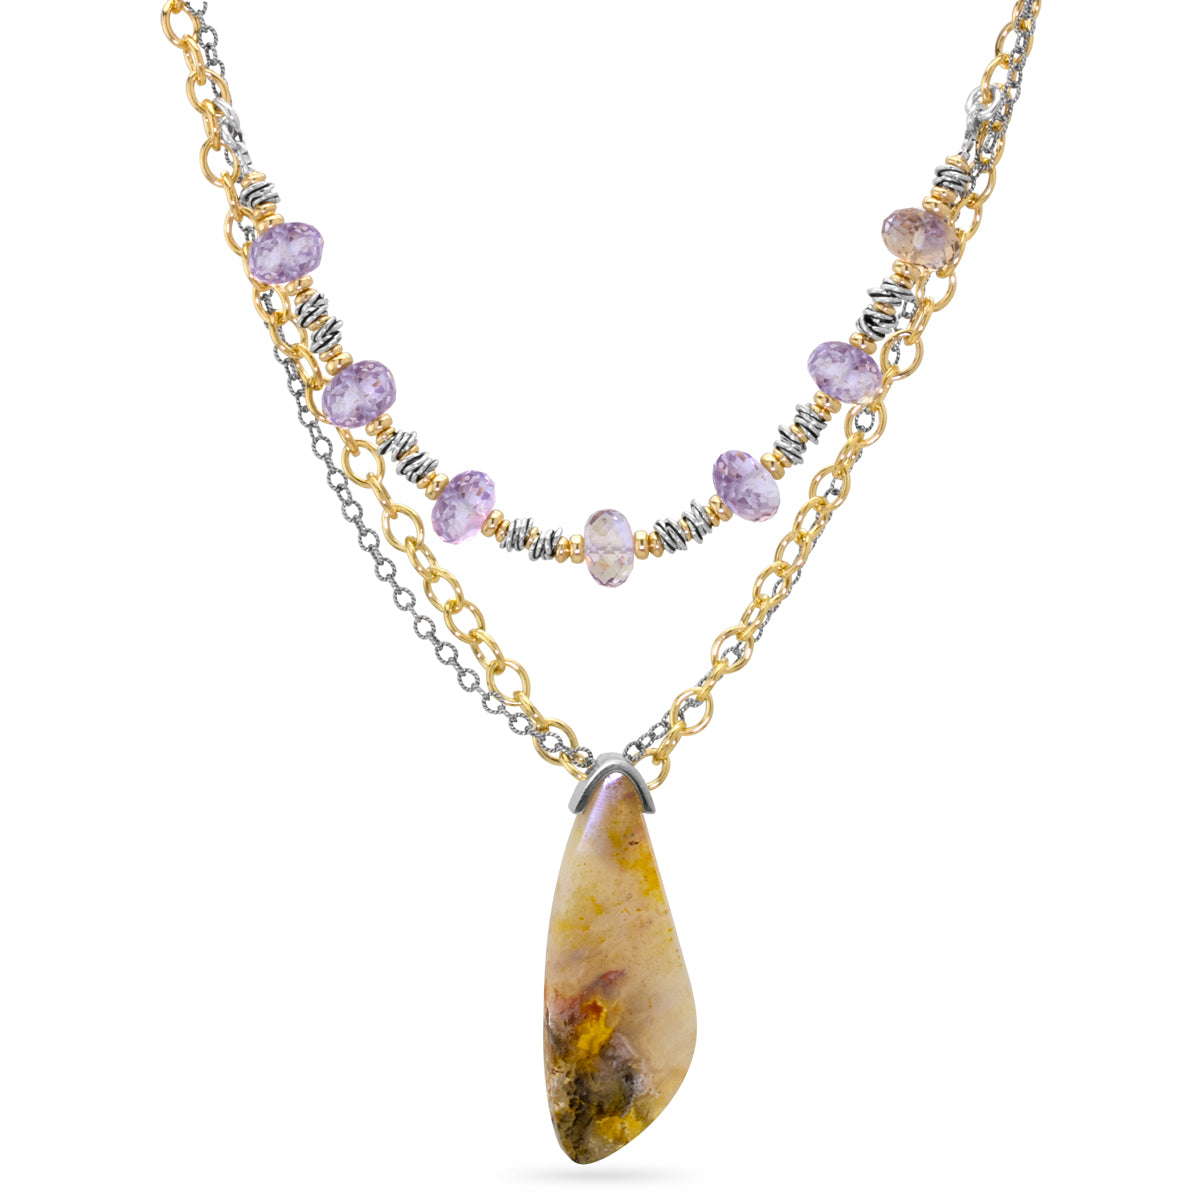 The Goddess Collection Plume Agate & Ametrine Necklace